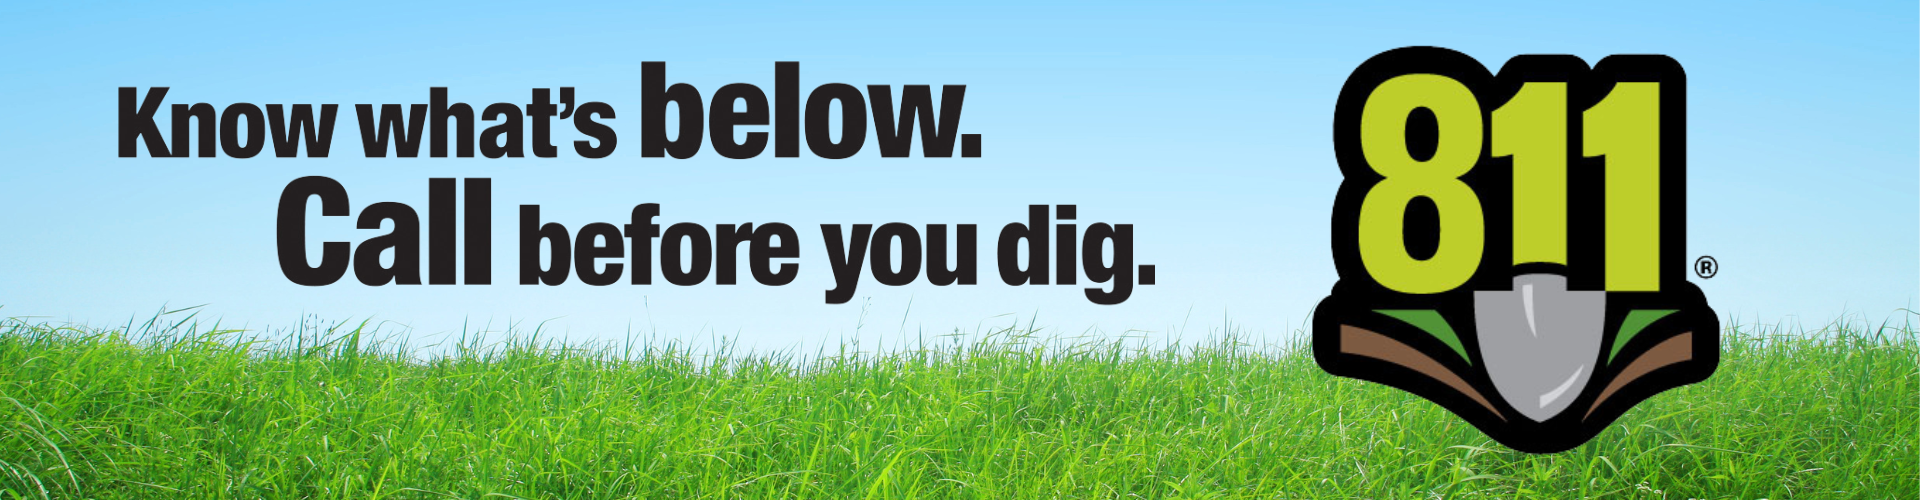 Call BEfore You Dig 811